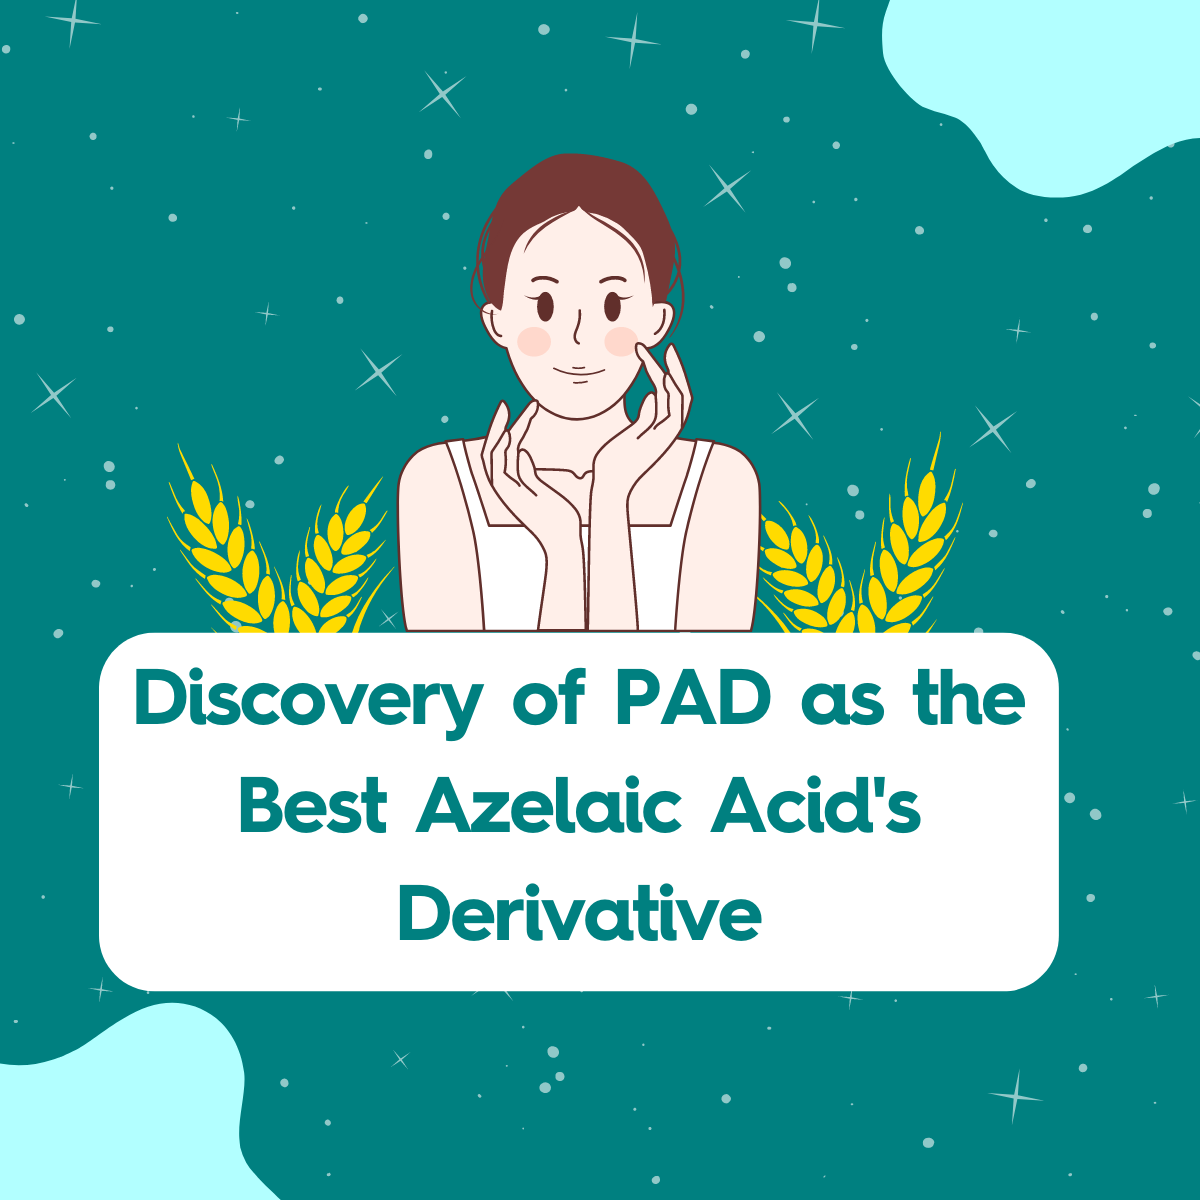 Discovery of PAD as the Best Azelaic Acid's Derivative